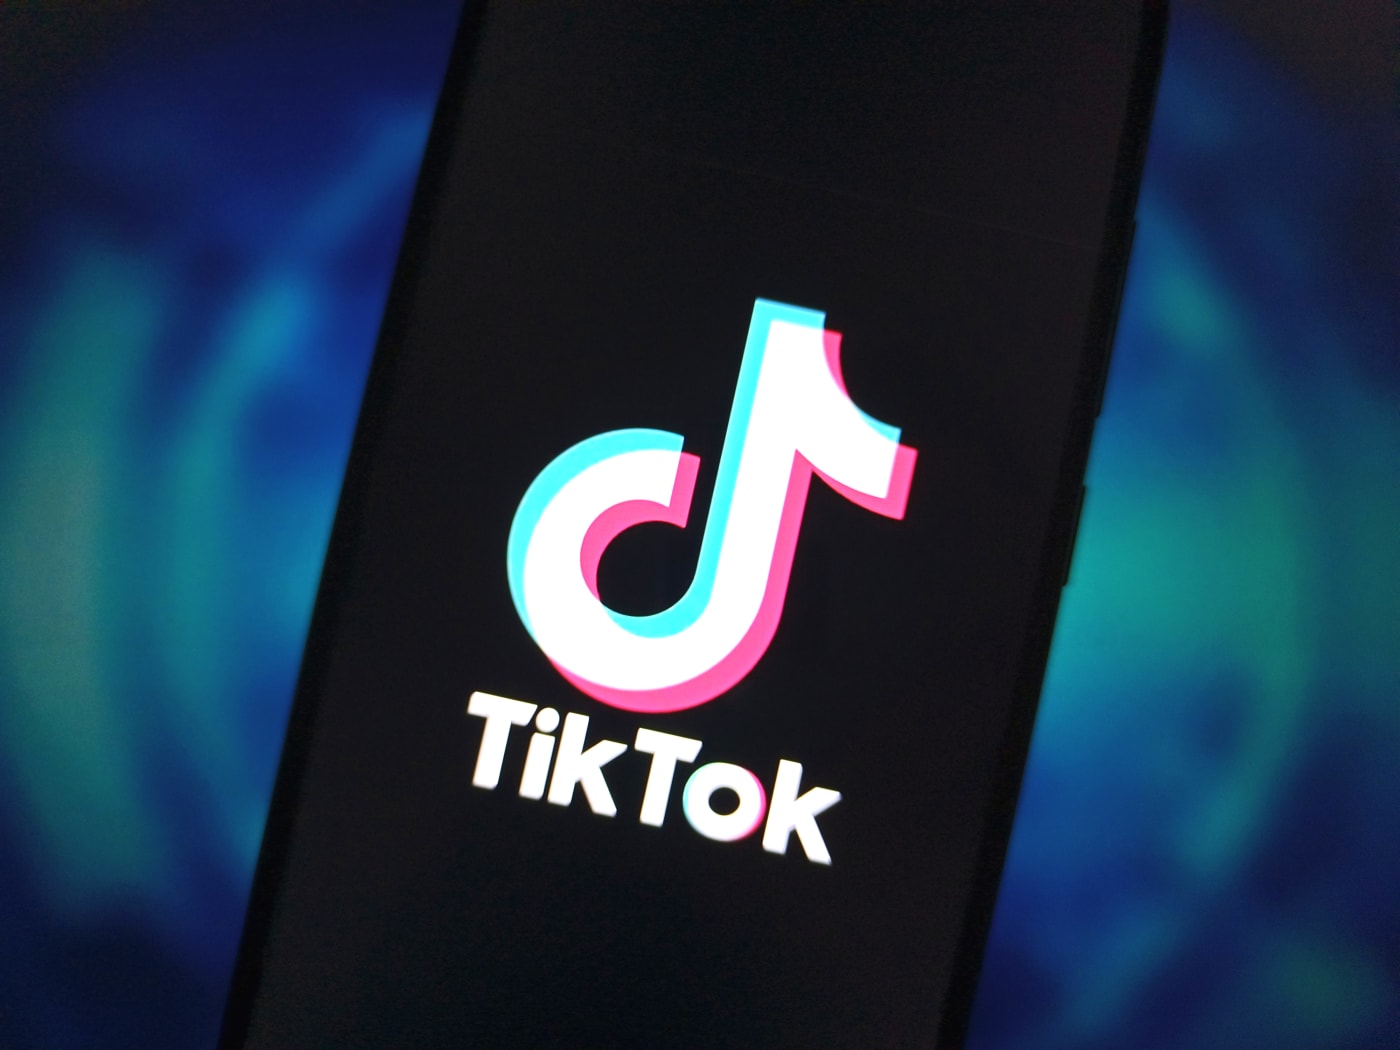 The TikTok ban law will be argued in court this September